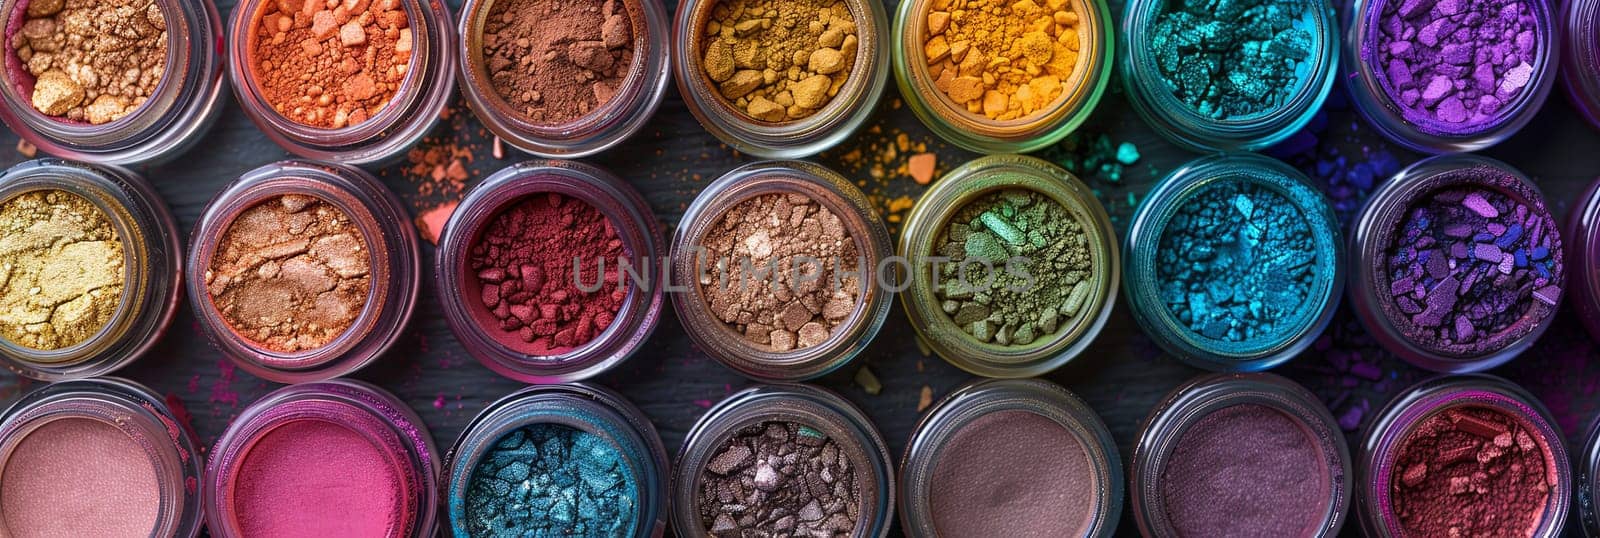 Close-up of assorted colorful makeup pigments and powders in small jars.